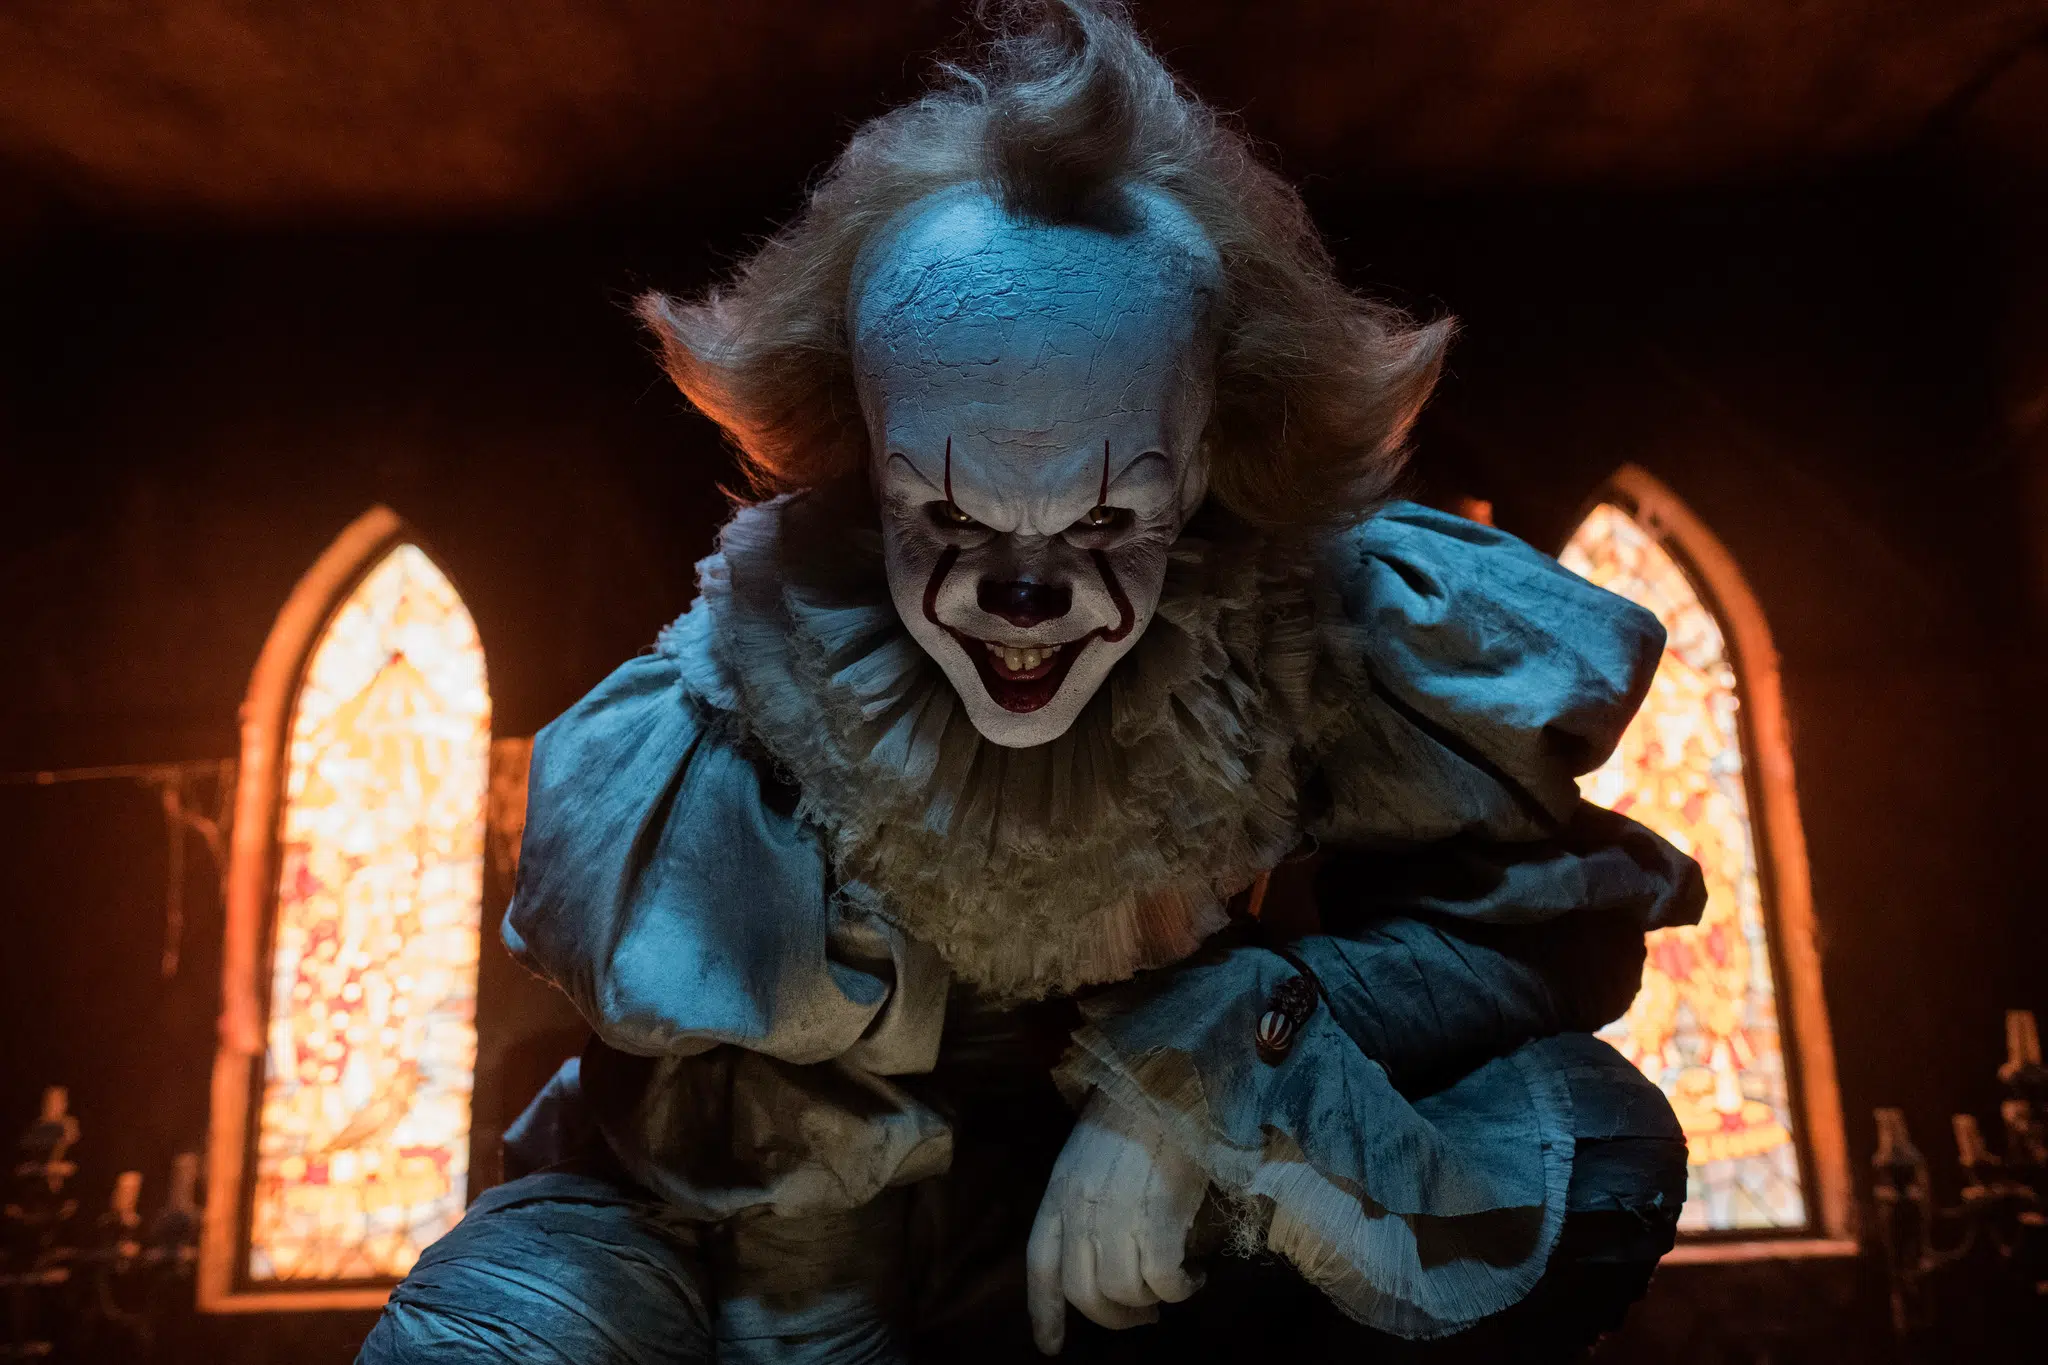 "It" Prequel Series "Welcome to Derry" Coming to HBO Max